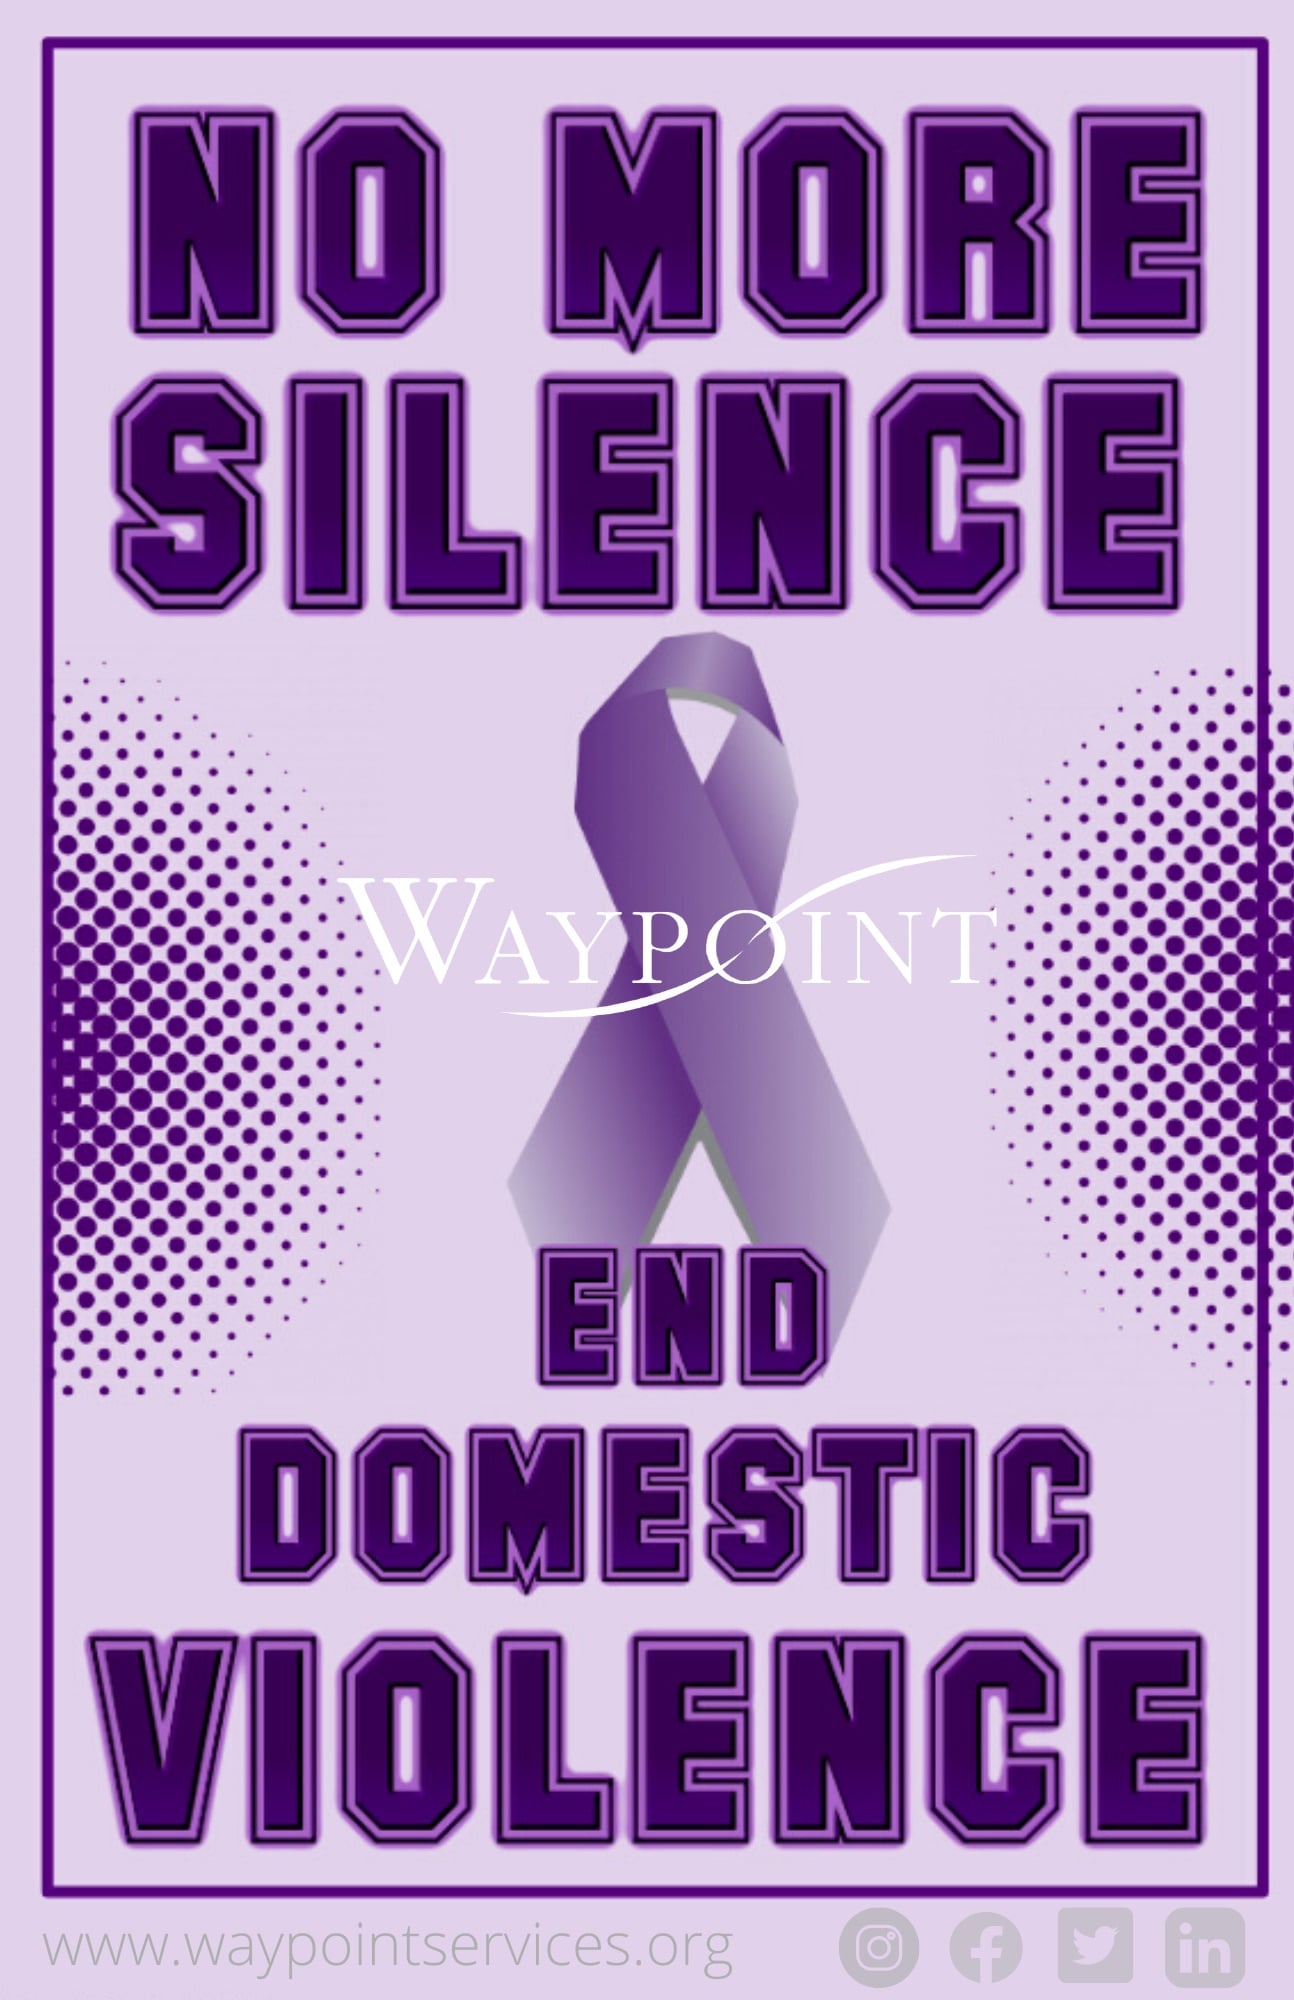 Waypoint Calls On Community to Help End Domestic Violence